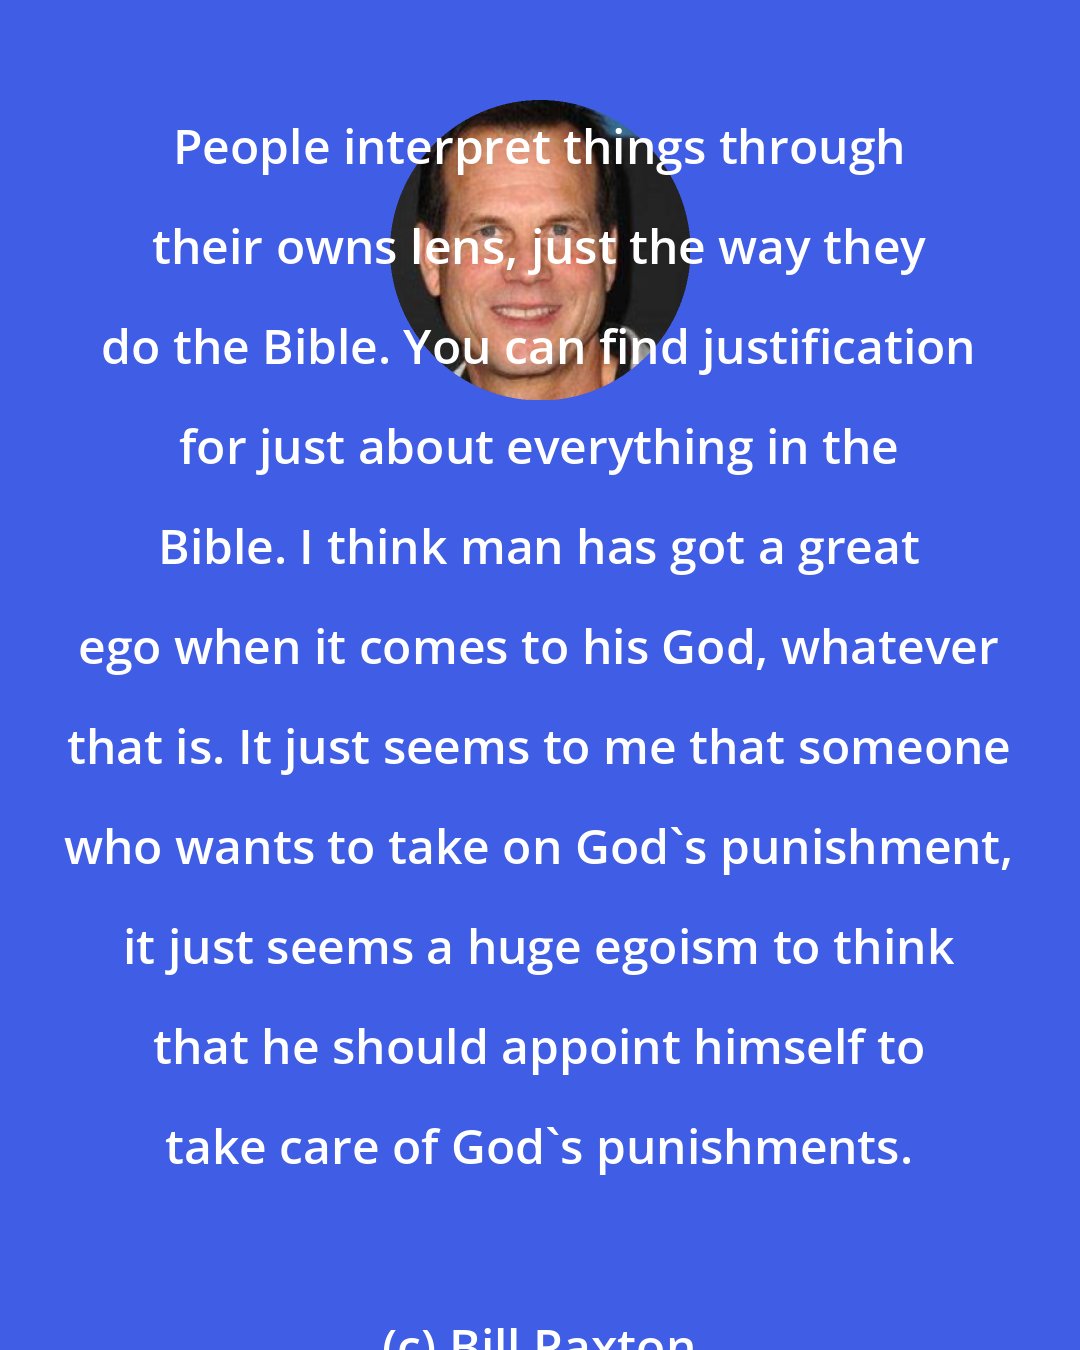 Bill Paxton: People interpret things through their owns lens, just the way they do the Bible. You can find justification for just about everything in the Bible. I think man has got a great ego when it comes to his God, whatever that is. It just seems to me that someone who wants to take on God's punishment, it just seems a huge egoism to think that he should appoint himself to take care of God's punishments.